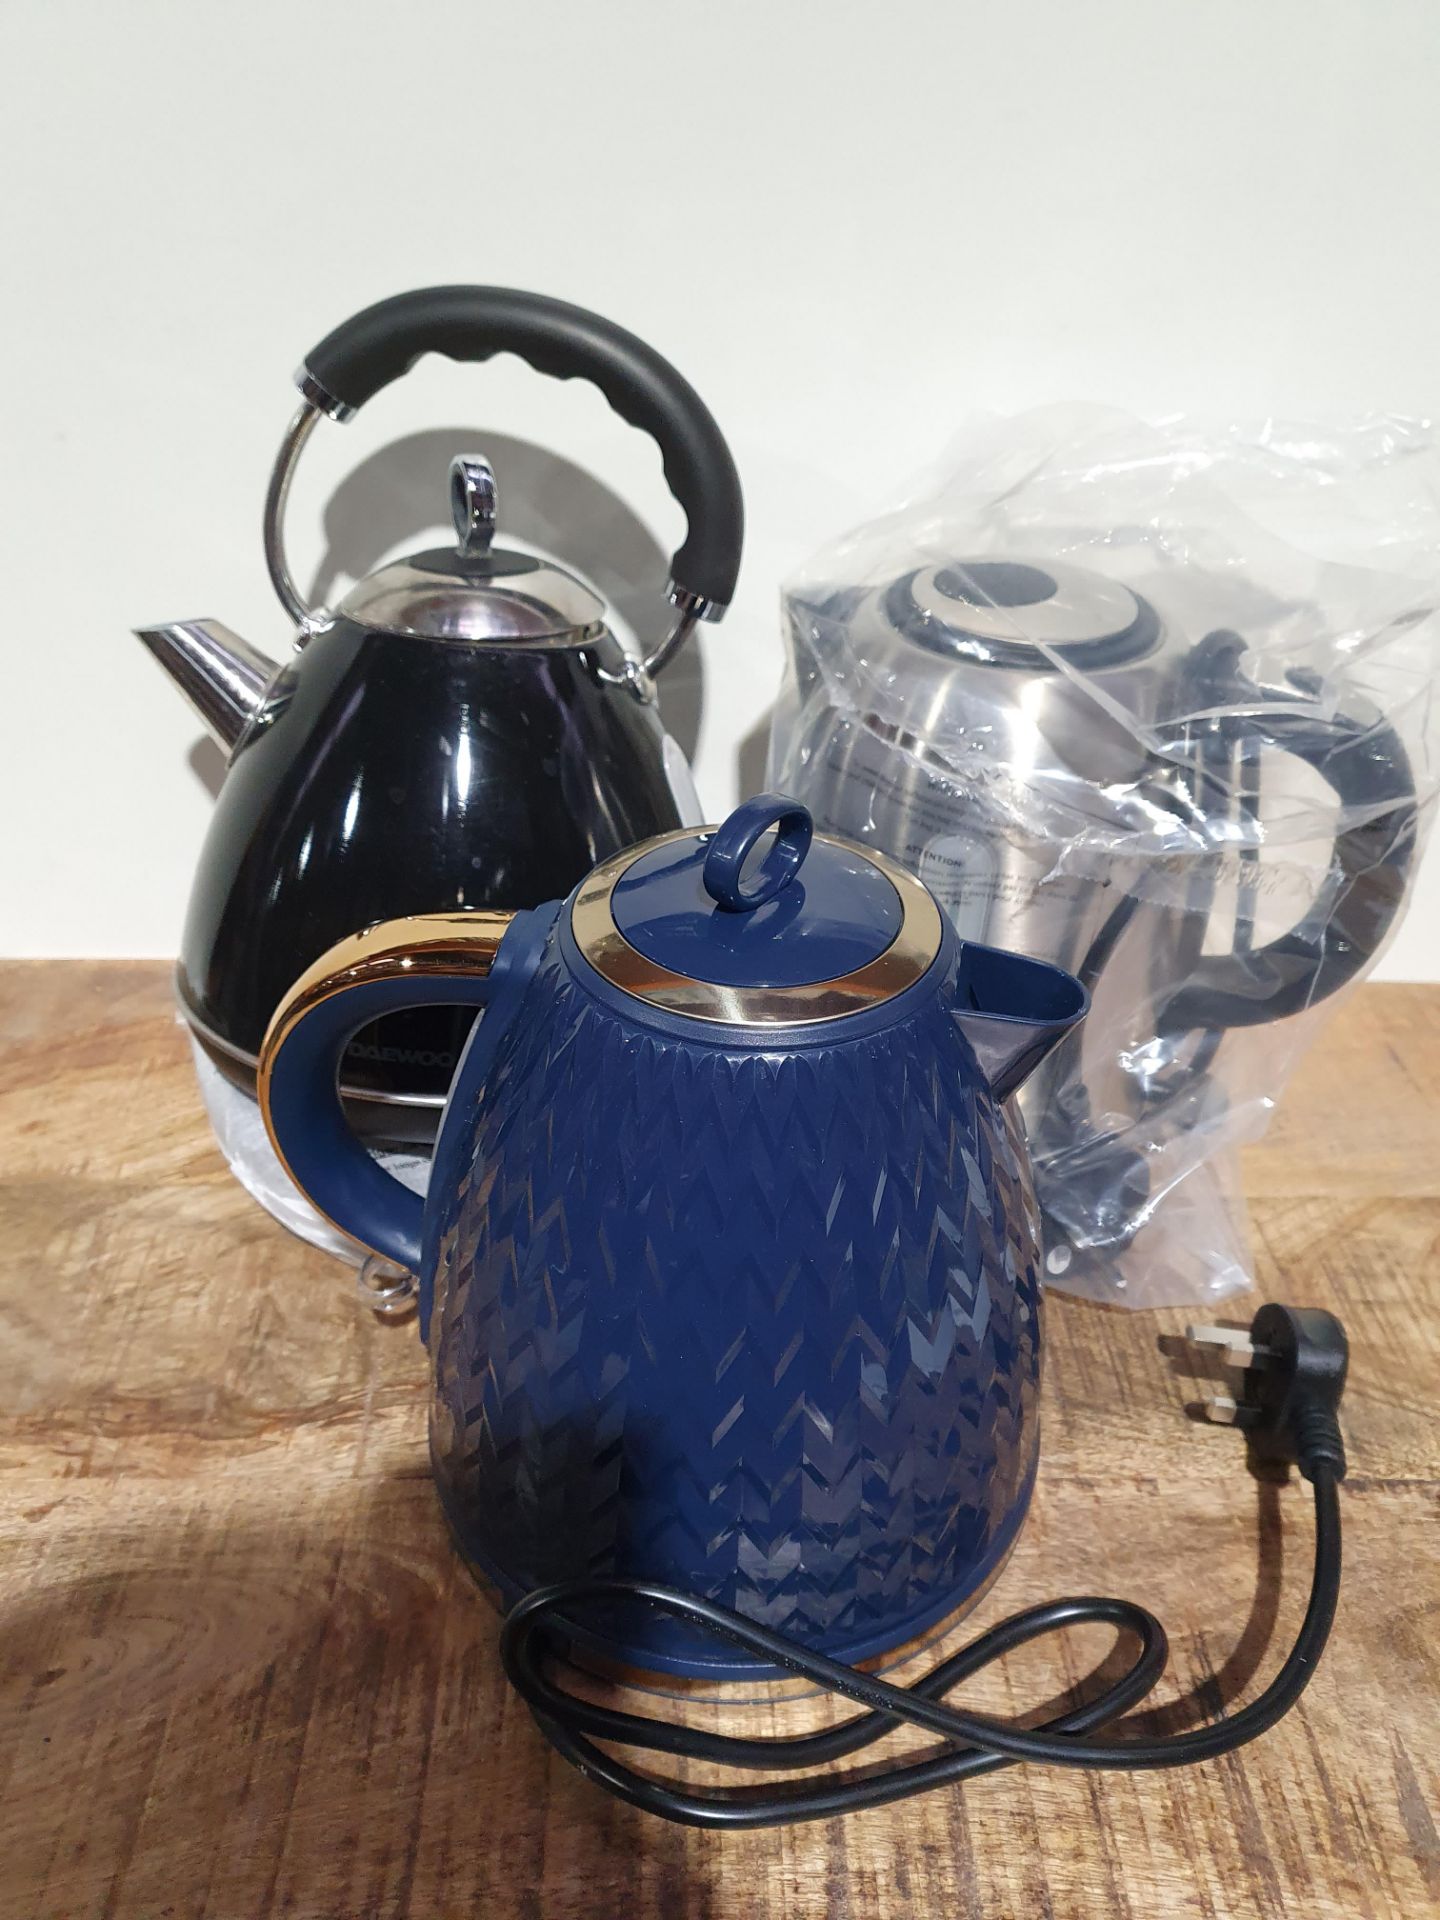 X 3 UNBOXED KETTLES RRP £120Condition ReportAppraisal Available on Request - All Items are